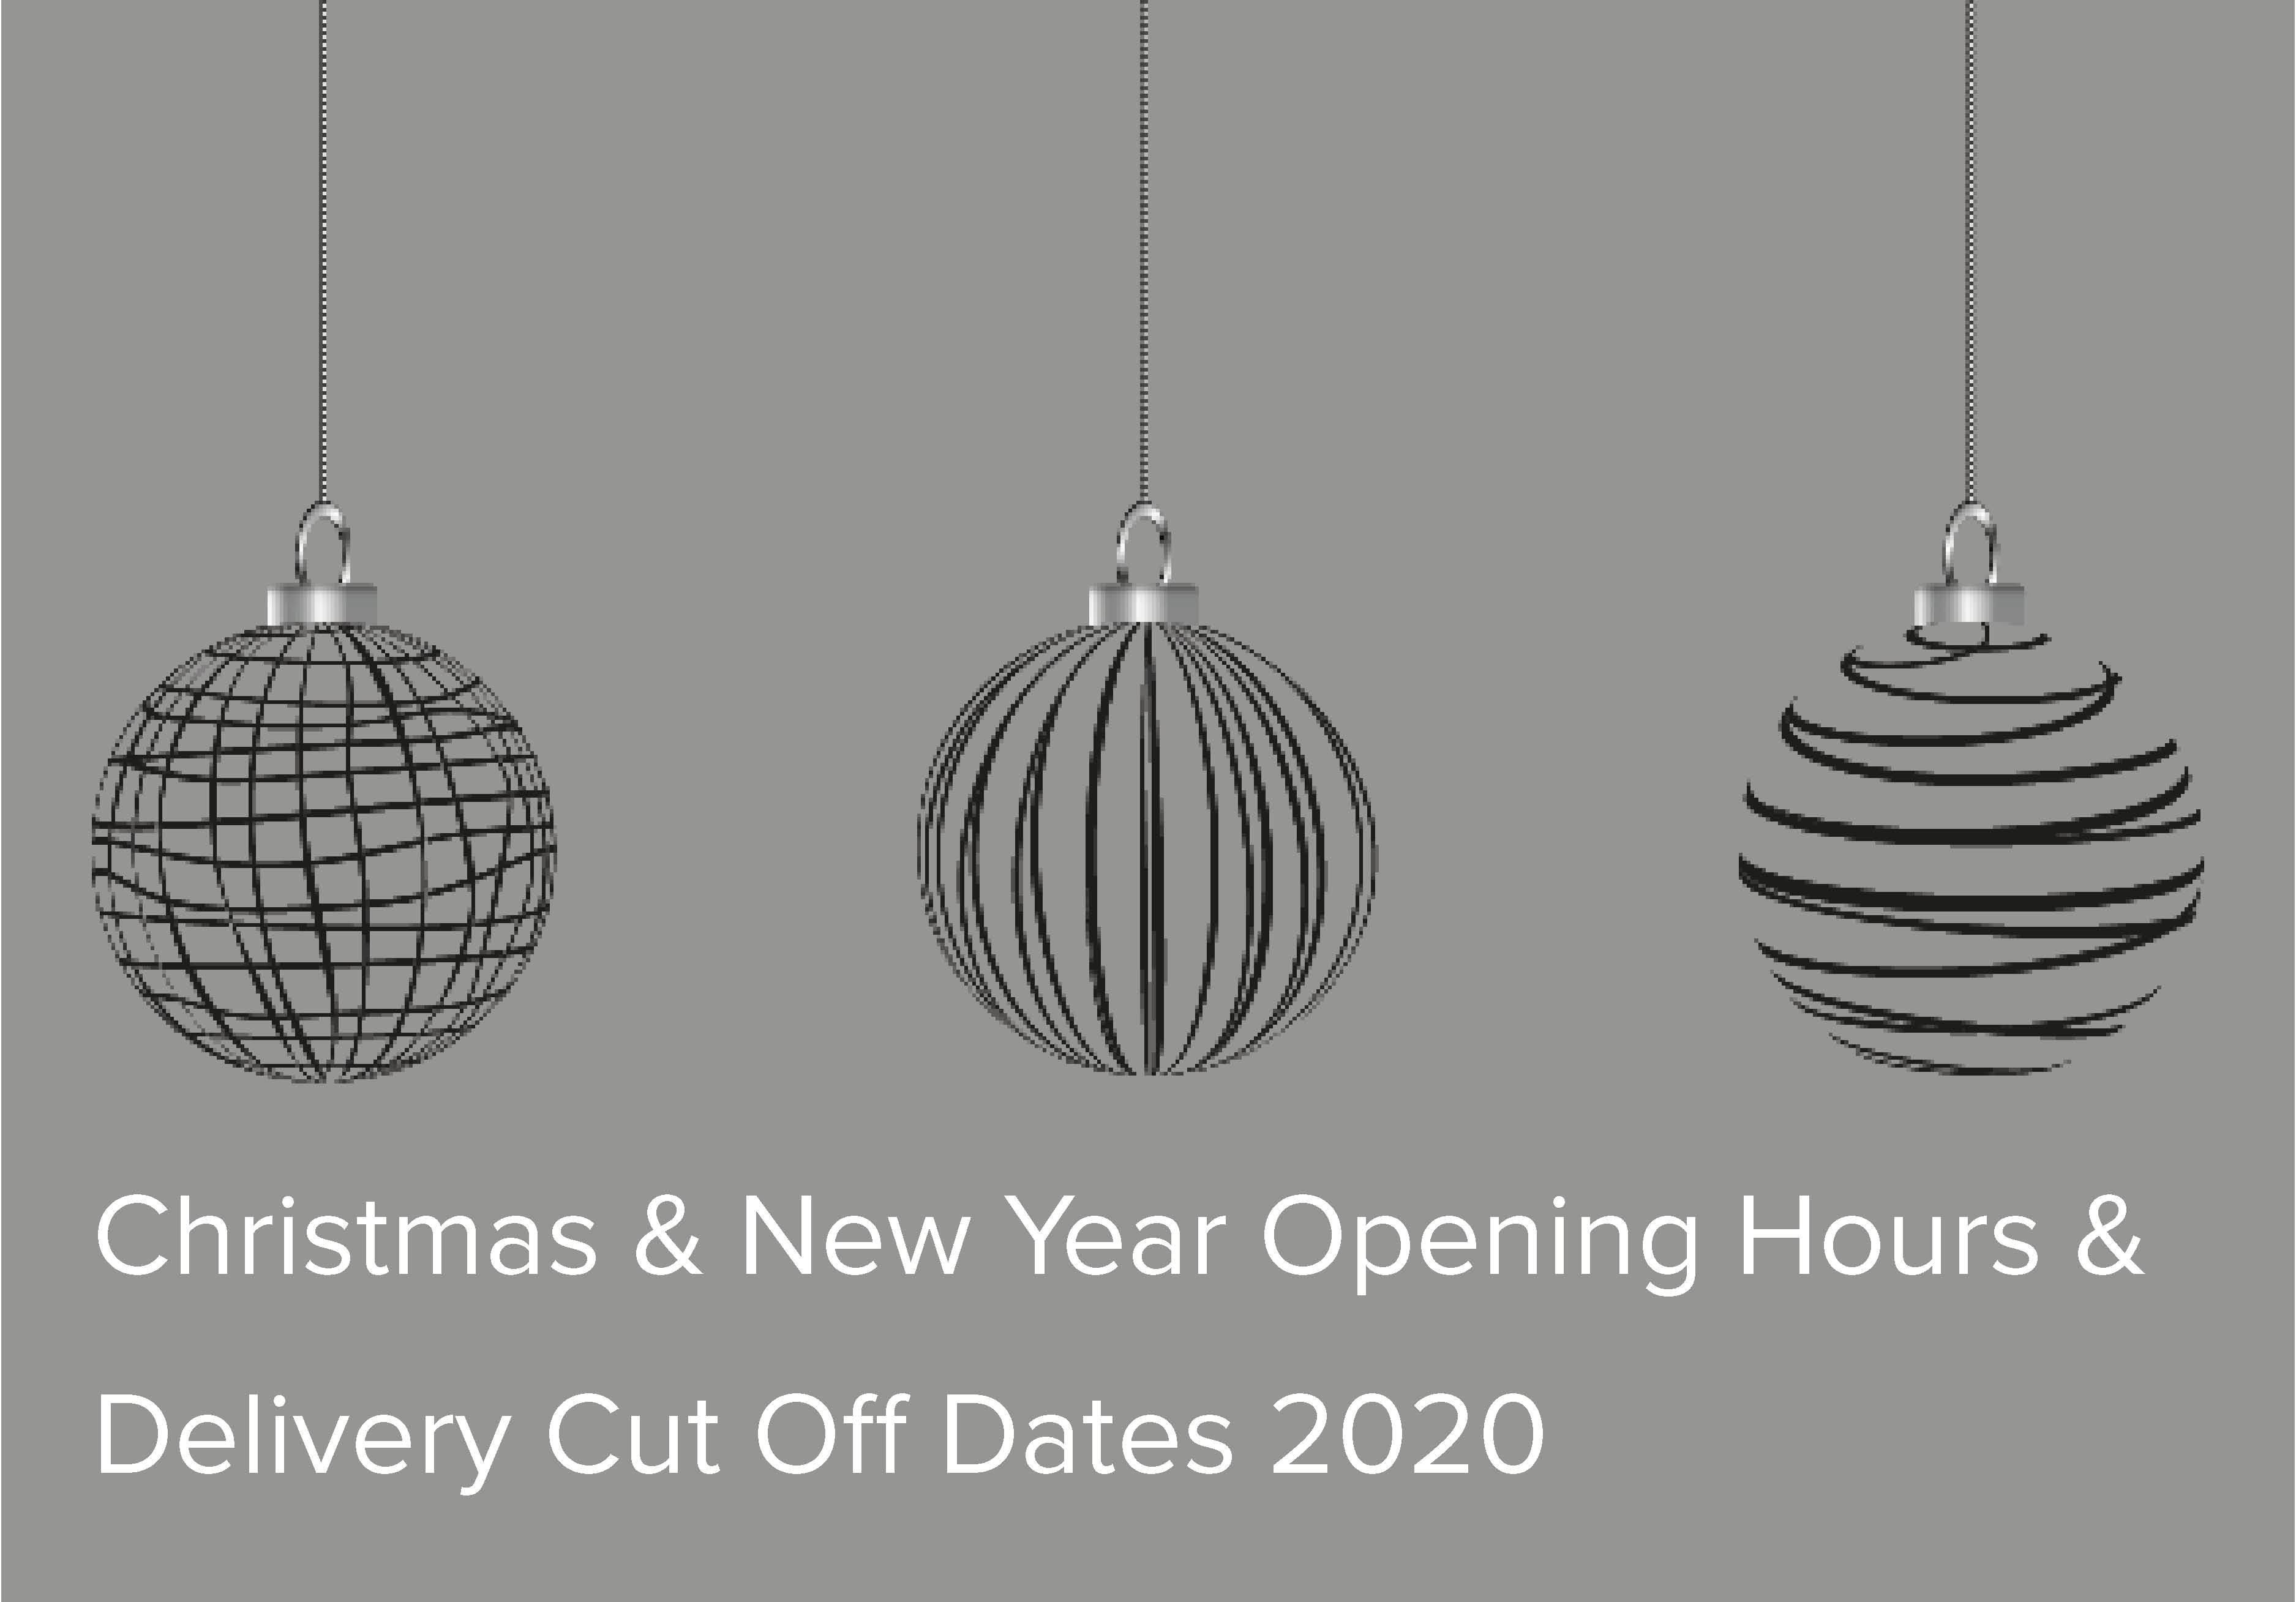 Birtley Group Christmas & New Year Delivery Cut Off Dates 2020